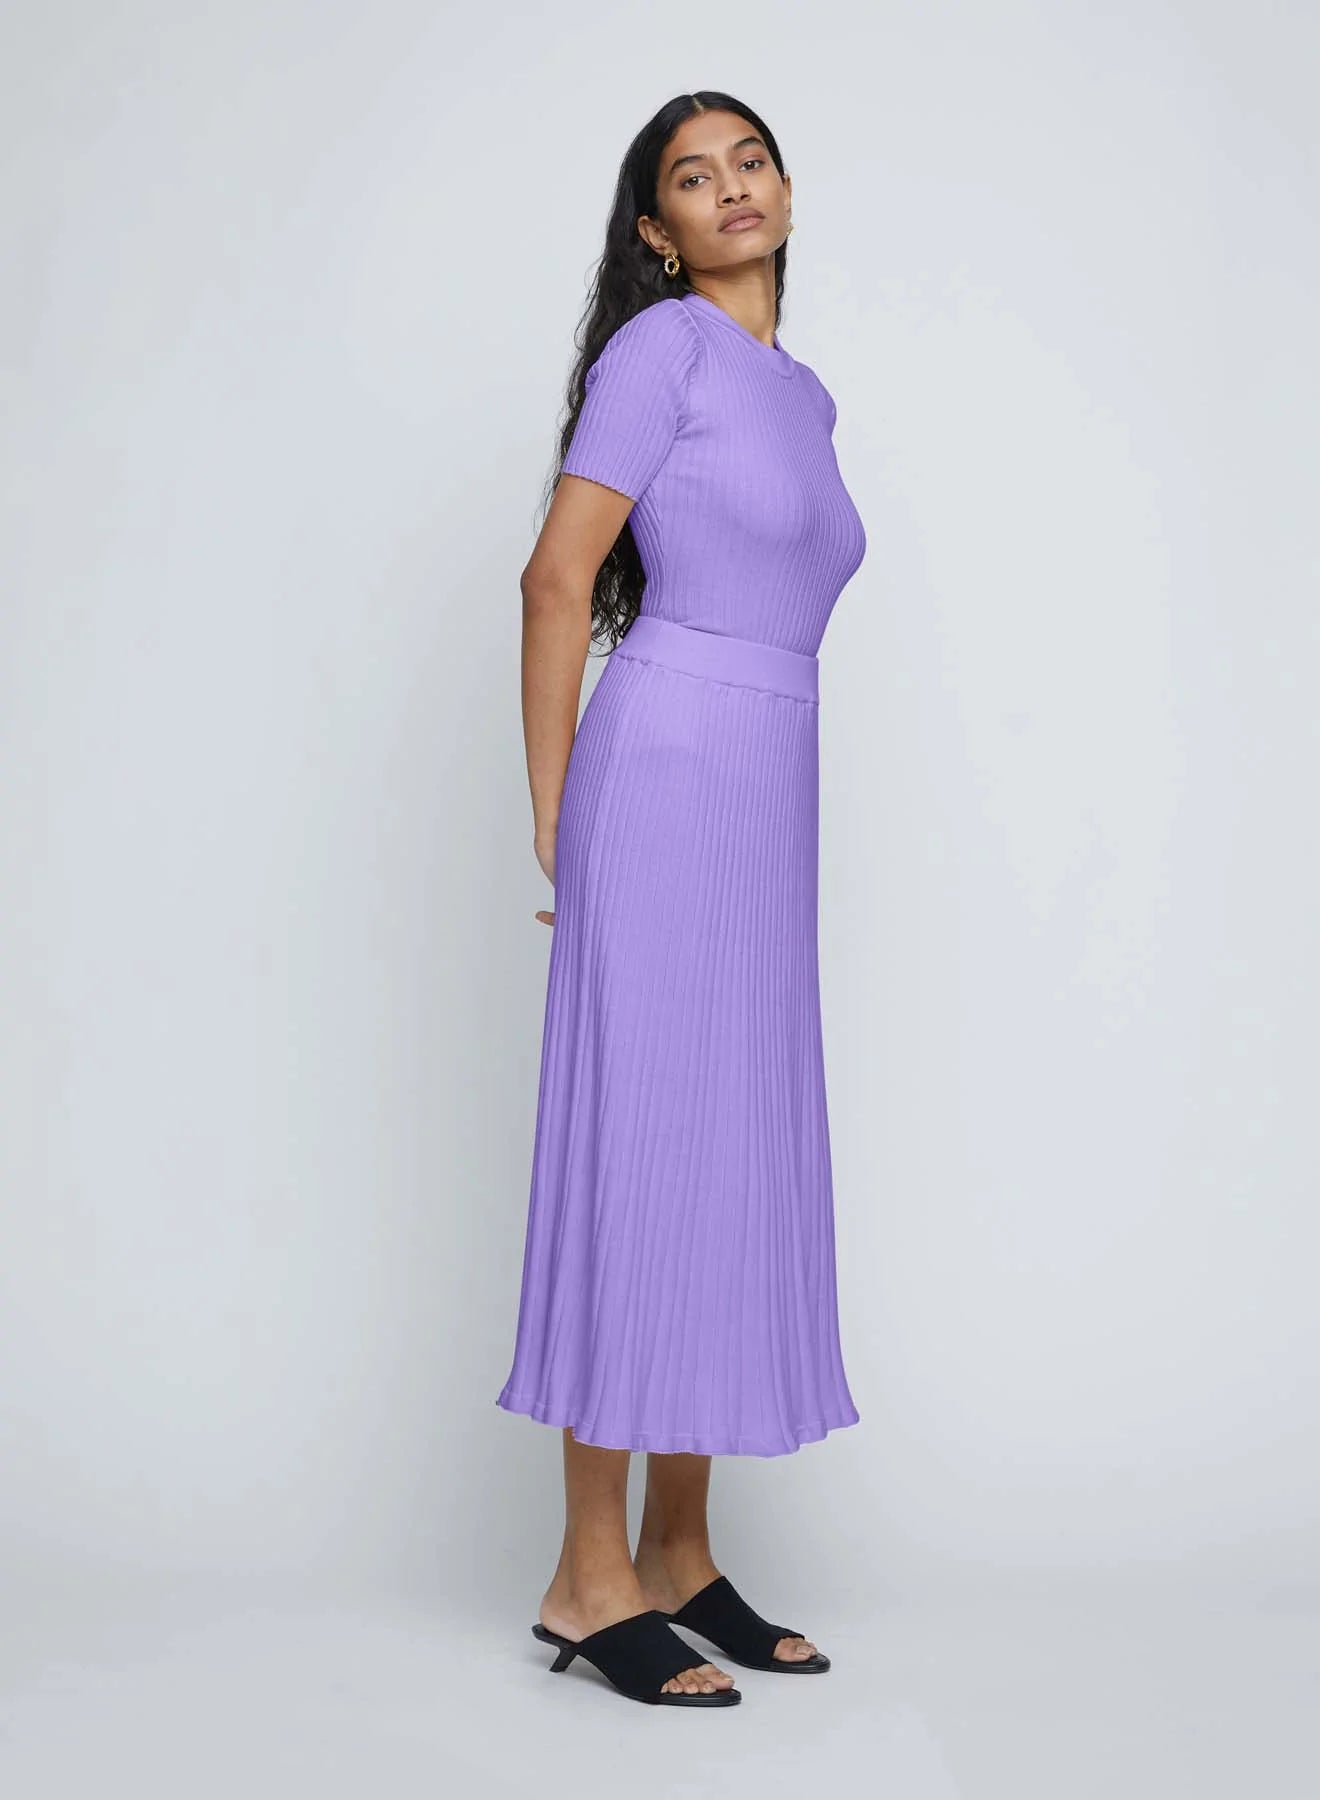 Cleo Skirt Periwinkle